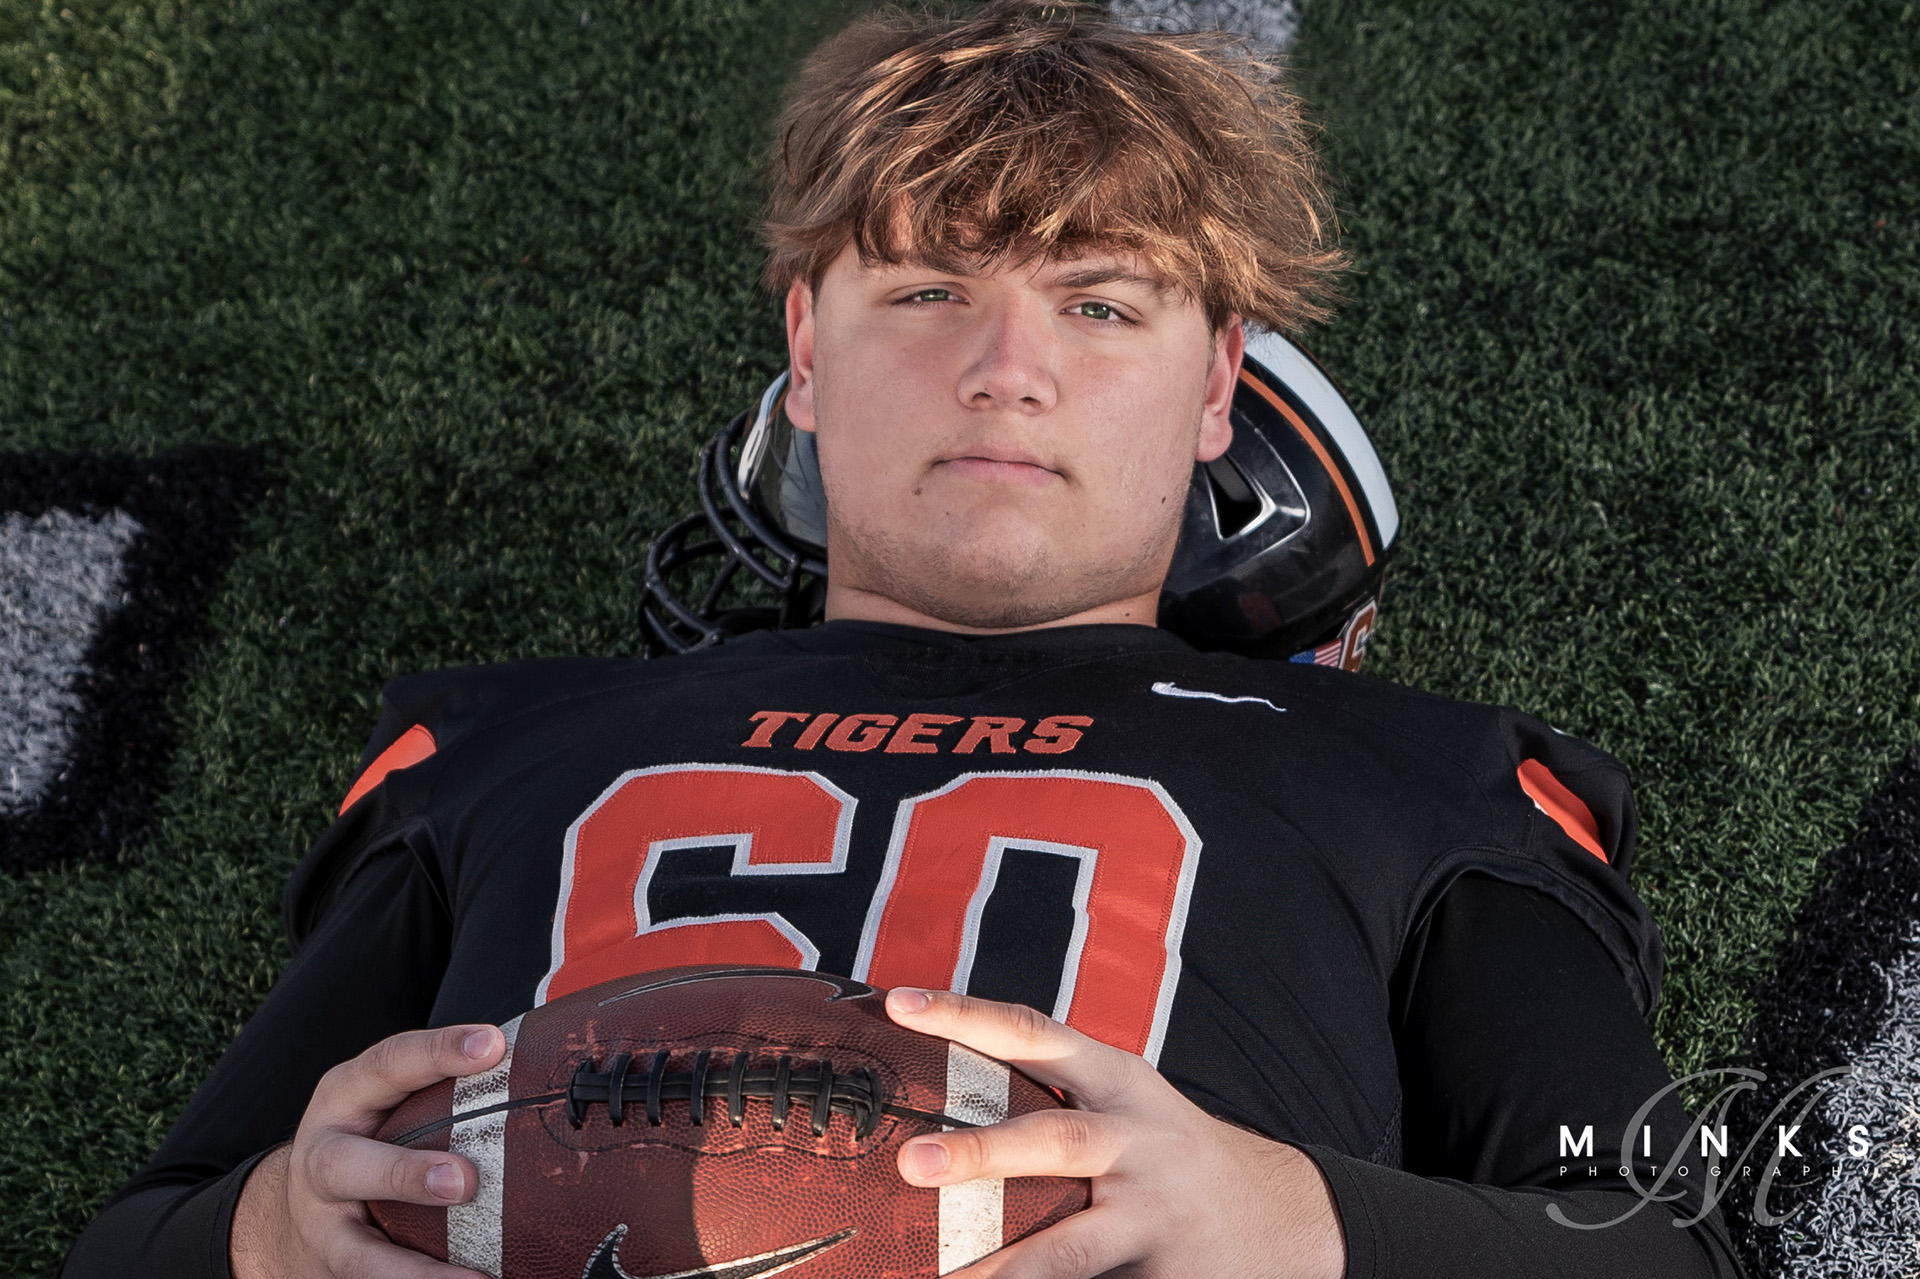 loveland ohio football player senior picture laying on field holding a football